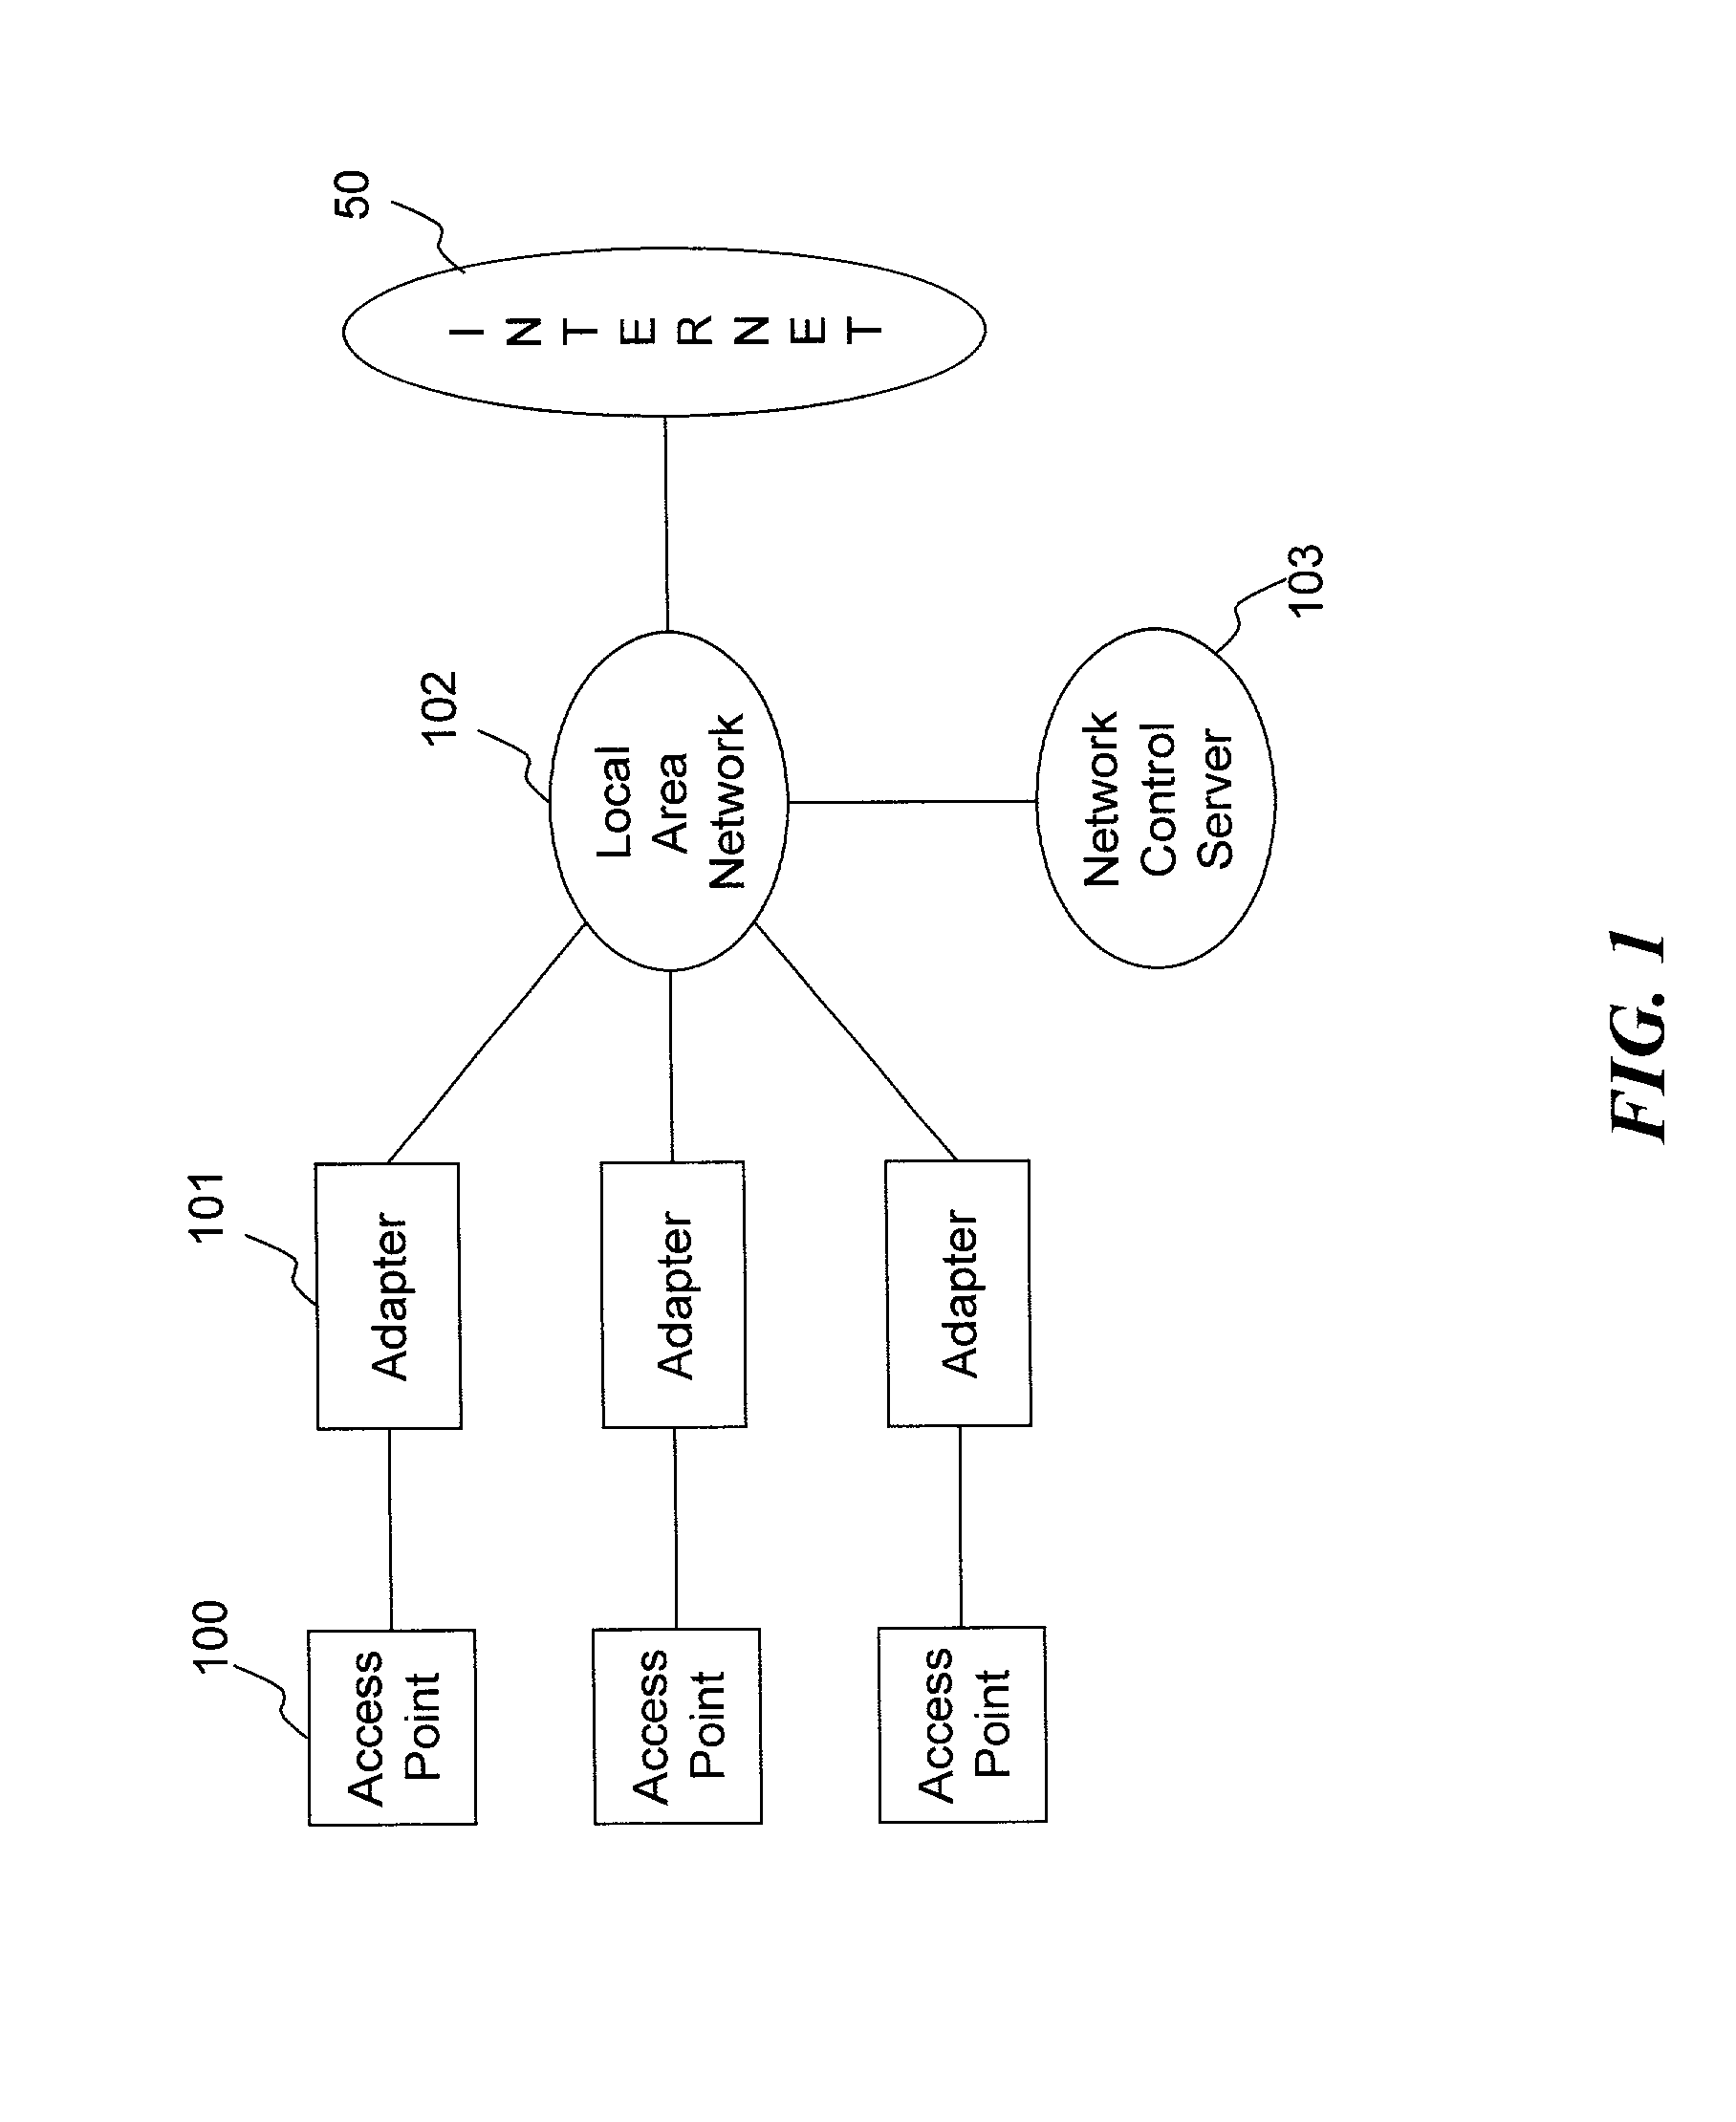 Location-aware service proxies in a short-range wireless environment